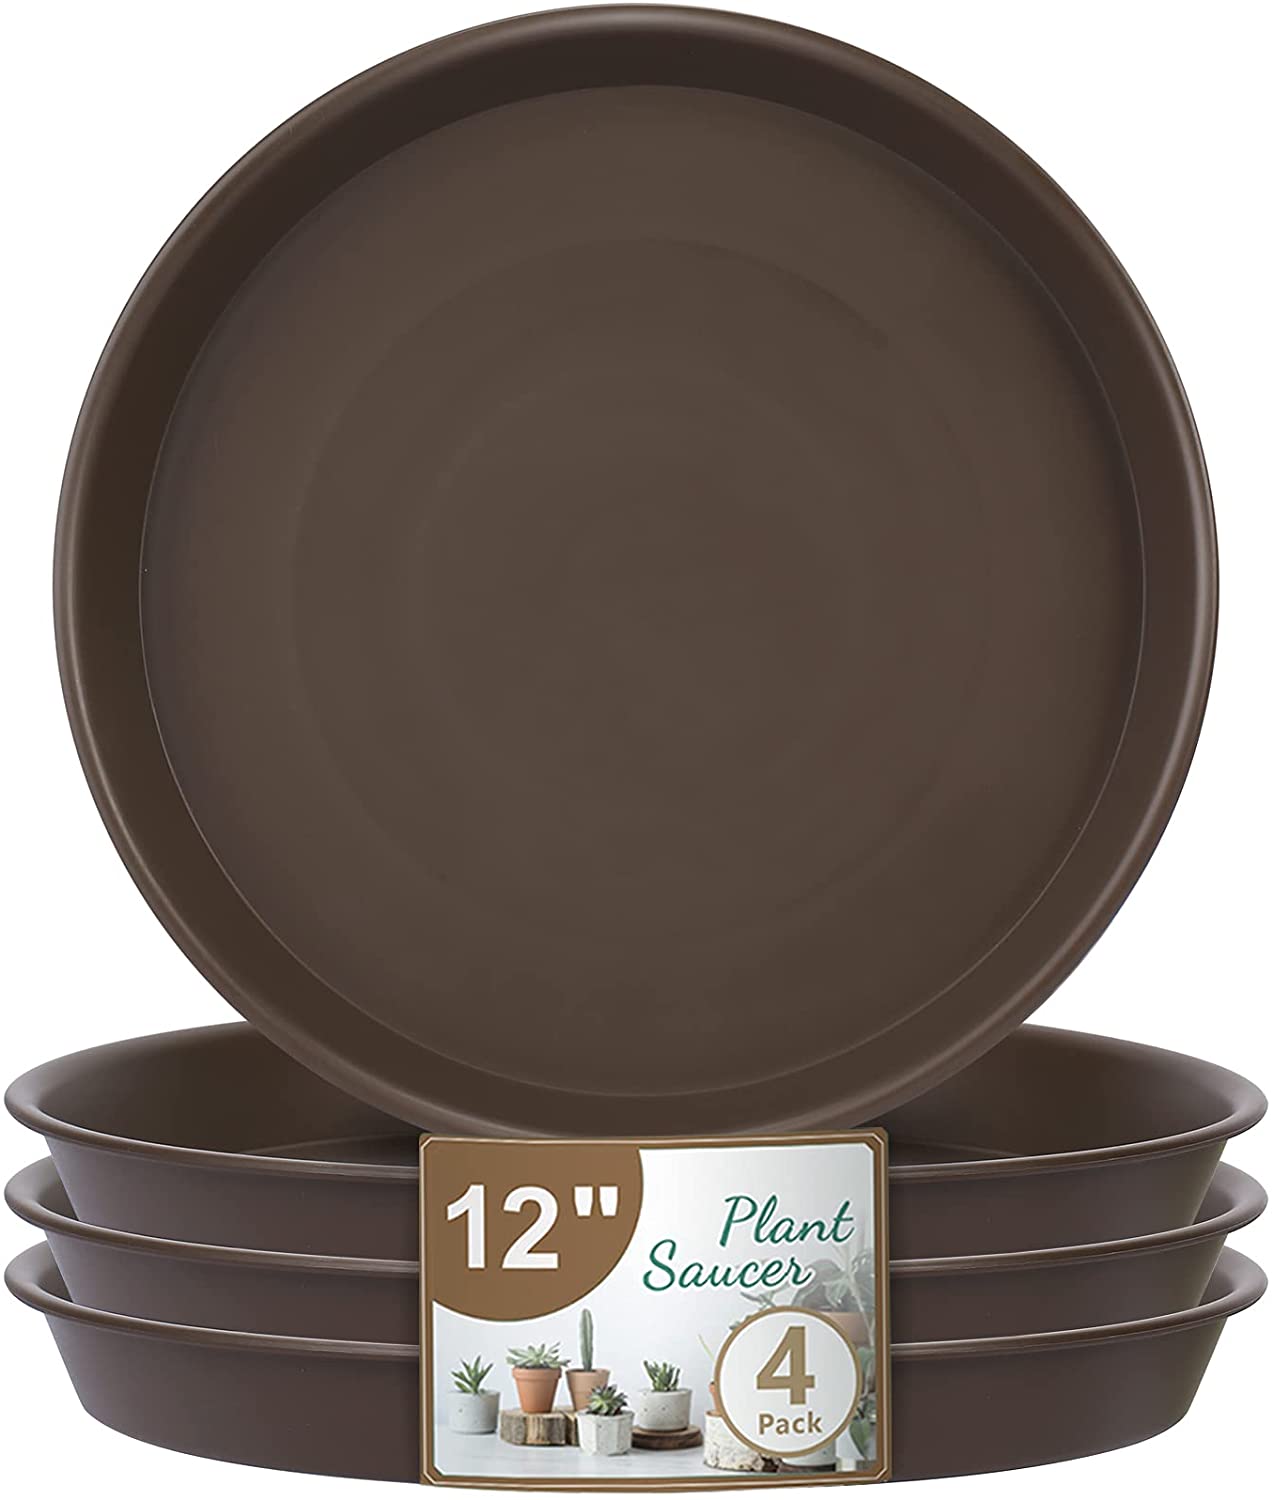 JOYSEUS Plant Saucer - 12 inch - 4 Pack Durable Plastic Plant Tray for Plant Pots, Thick Plant Saucer for Indoor & Outdoor Plants. (Brown)